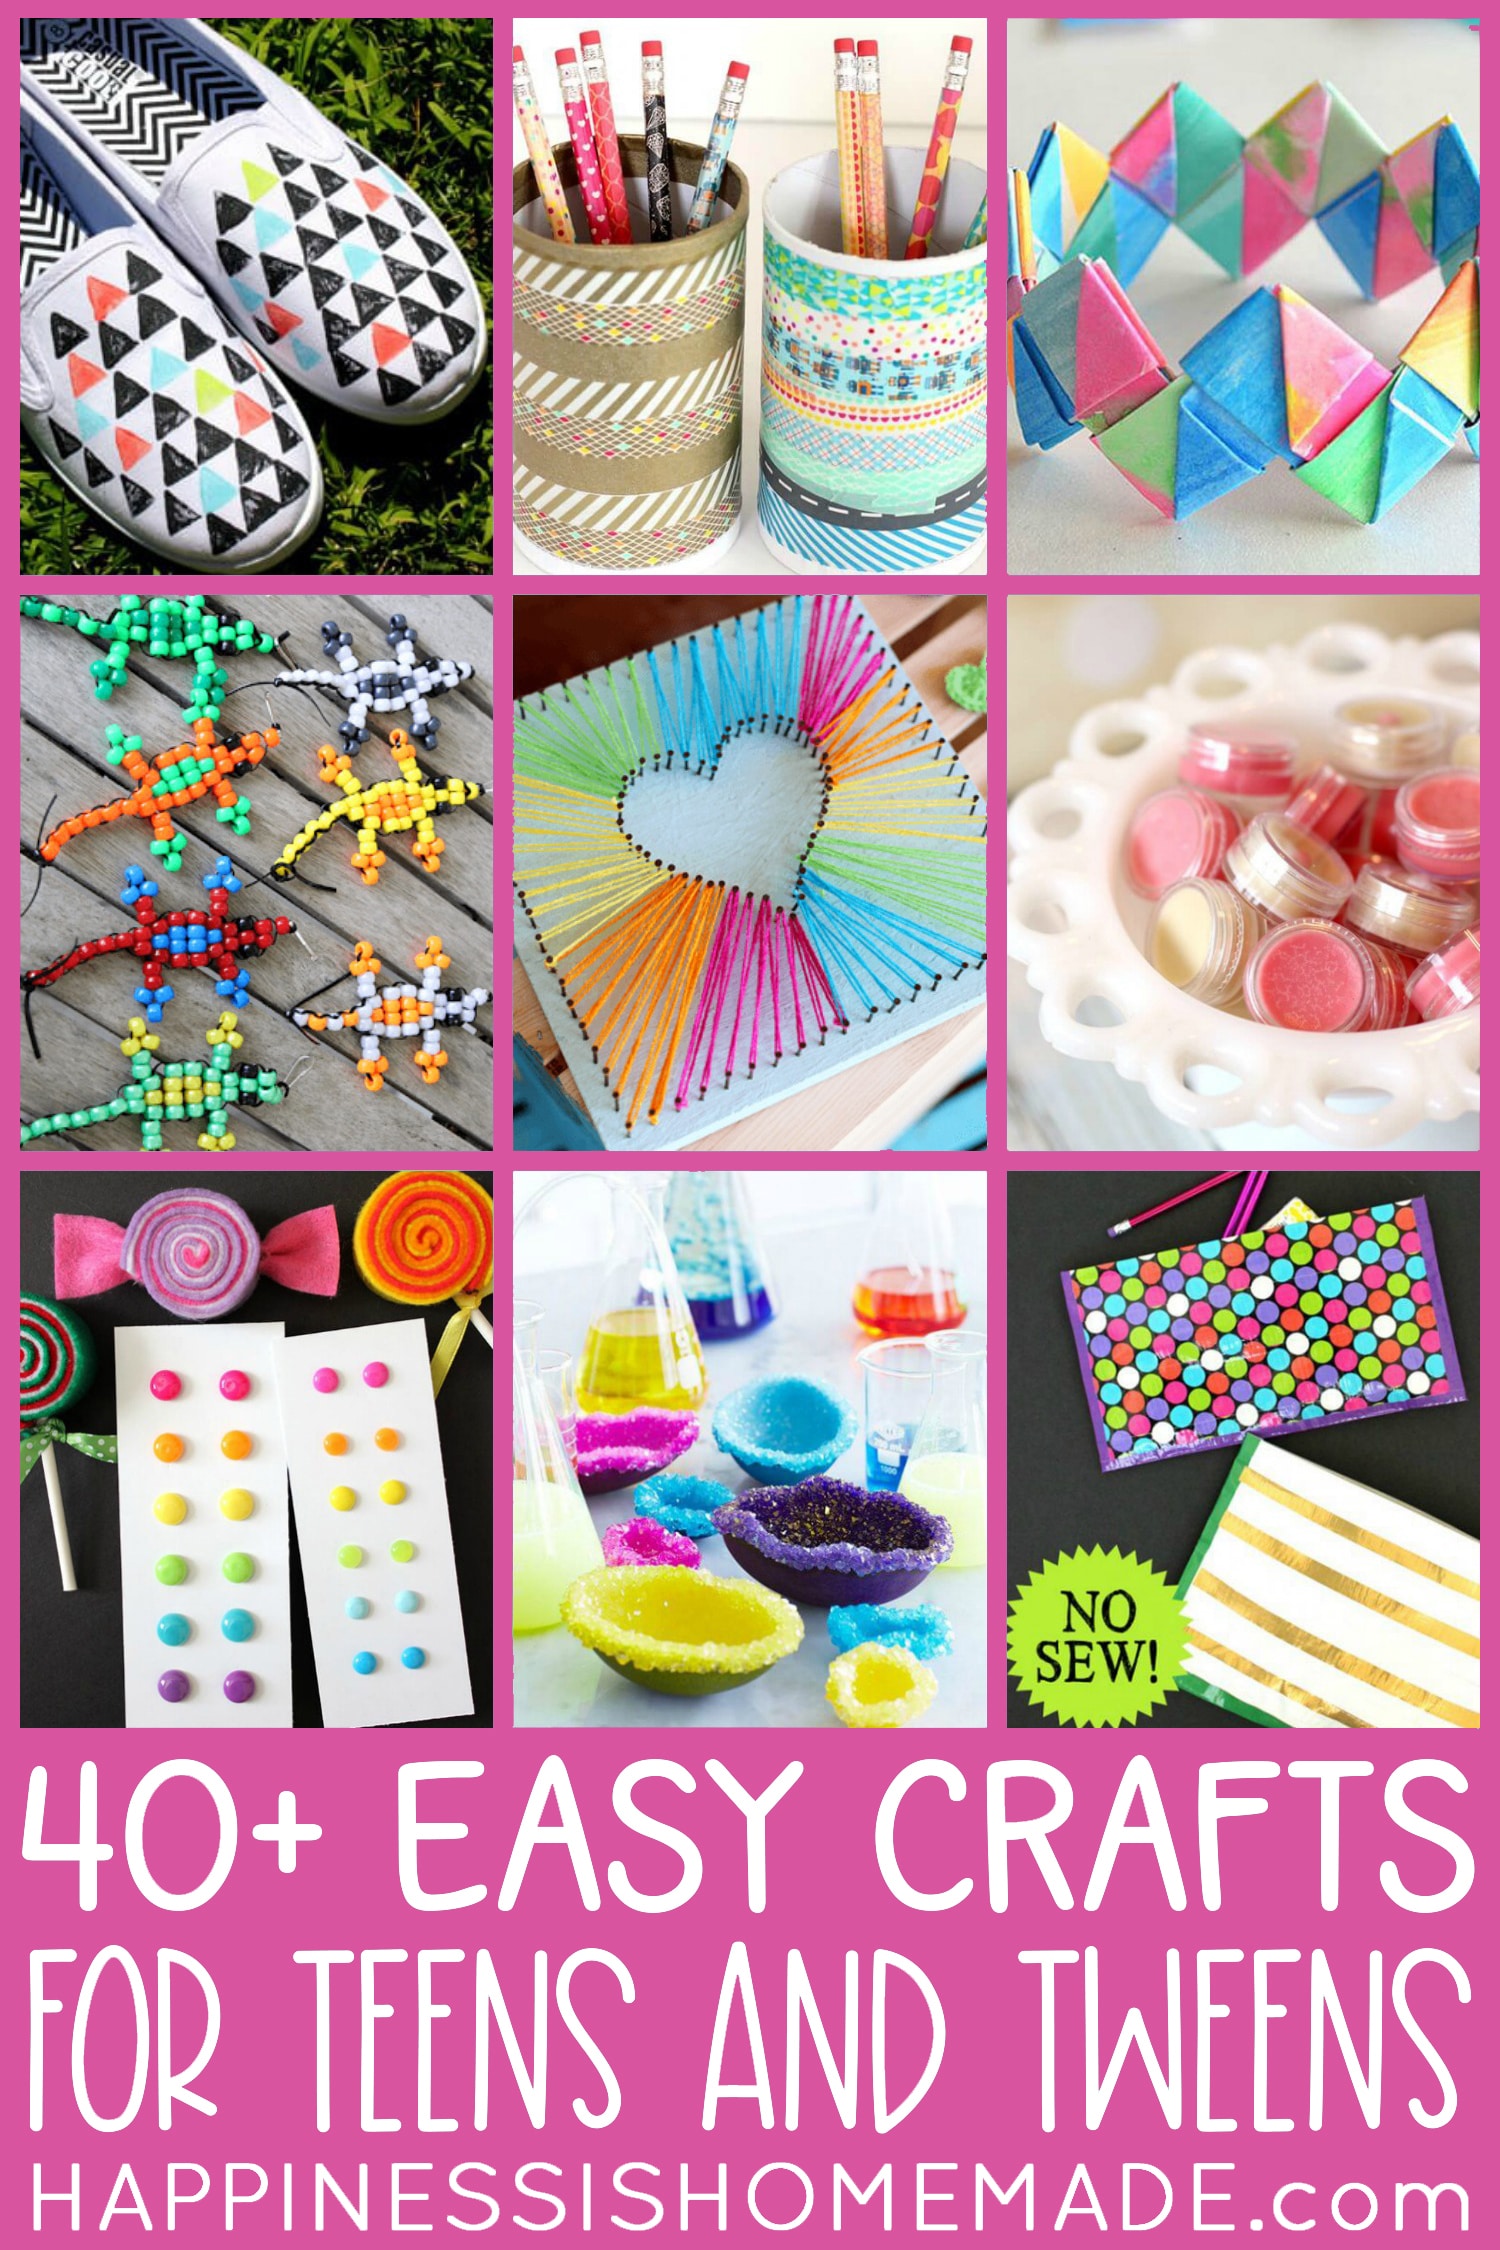 https://www.happinessishomemade.net/wp-content/uploads/2021/09/Fun-and-Easy-Crafts-for-Teens-1.jpg